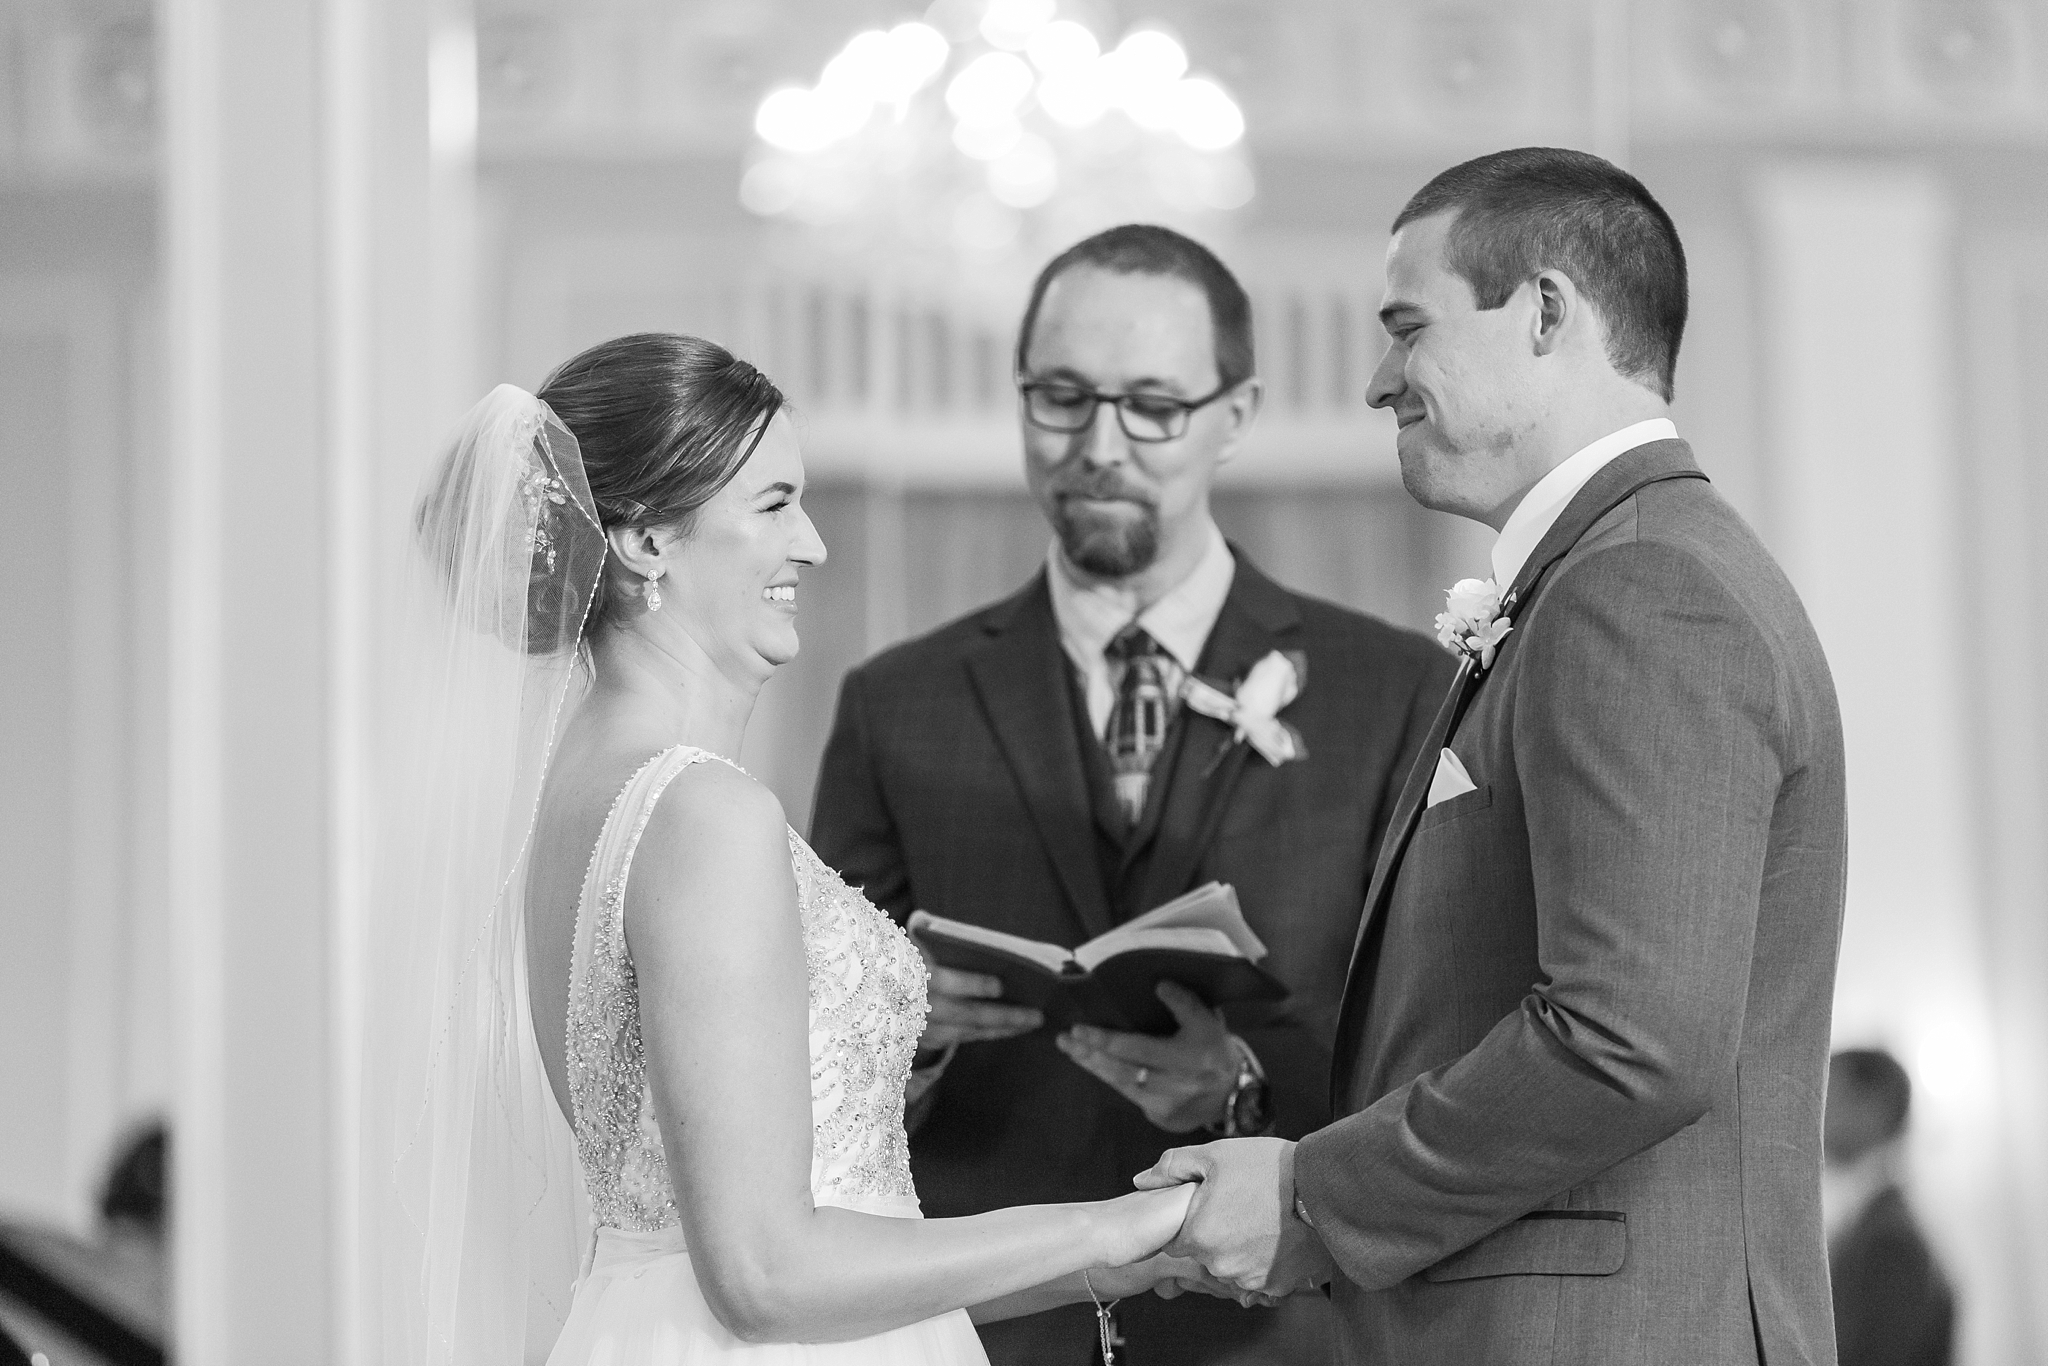 classic-intimate-fun-wedding-photos-at-the-meeting-house-grand-ballroom-in-plymouth-michigan-by-courtney-carolyn-photography_0031.jpg